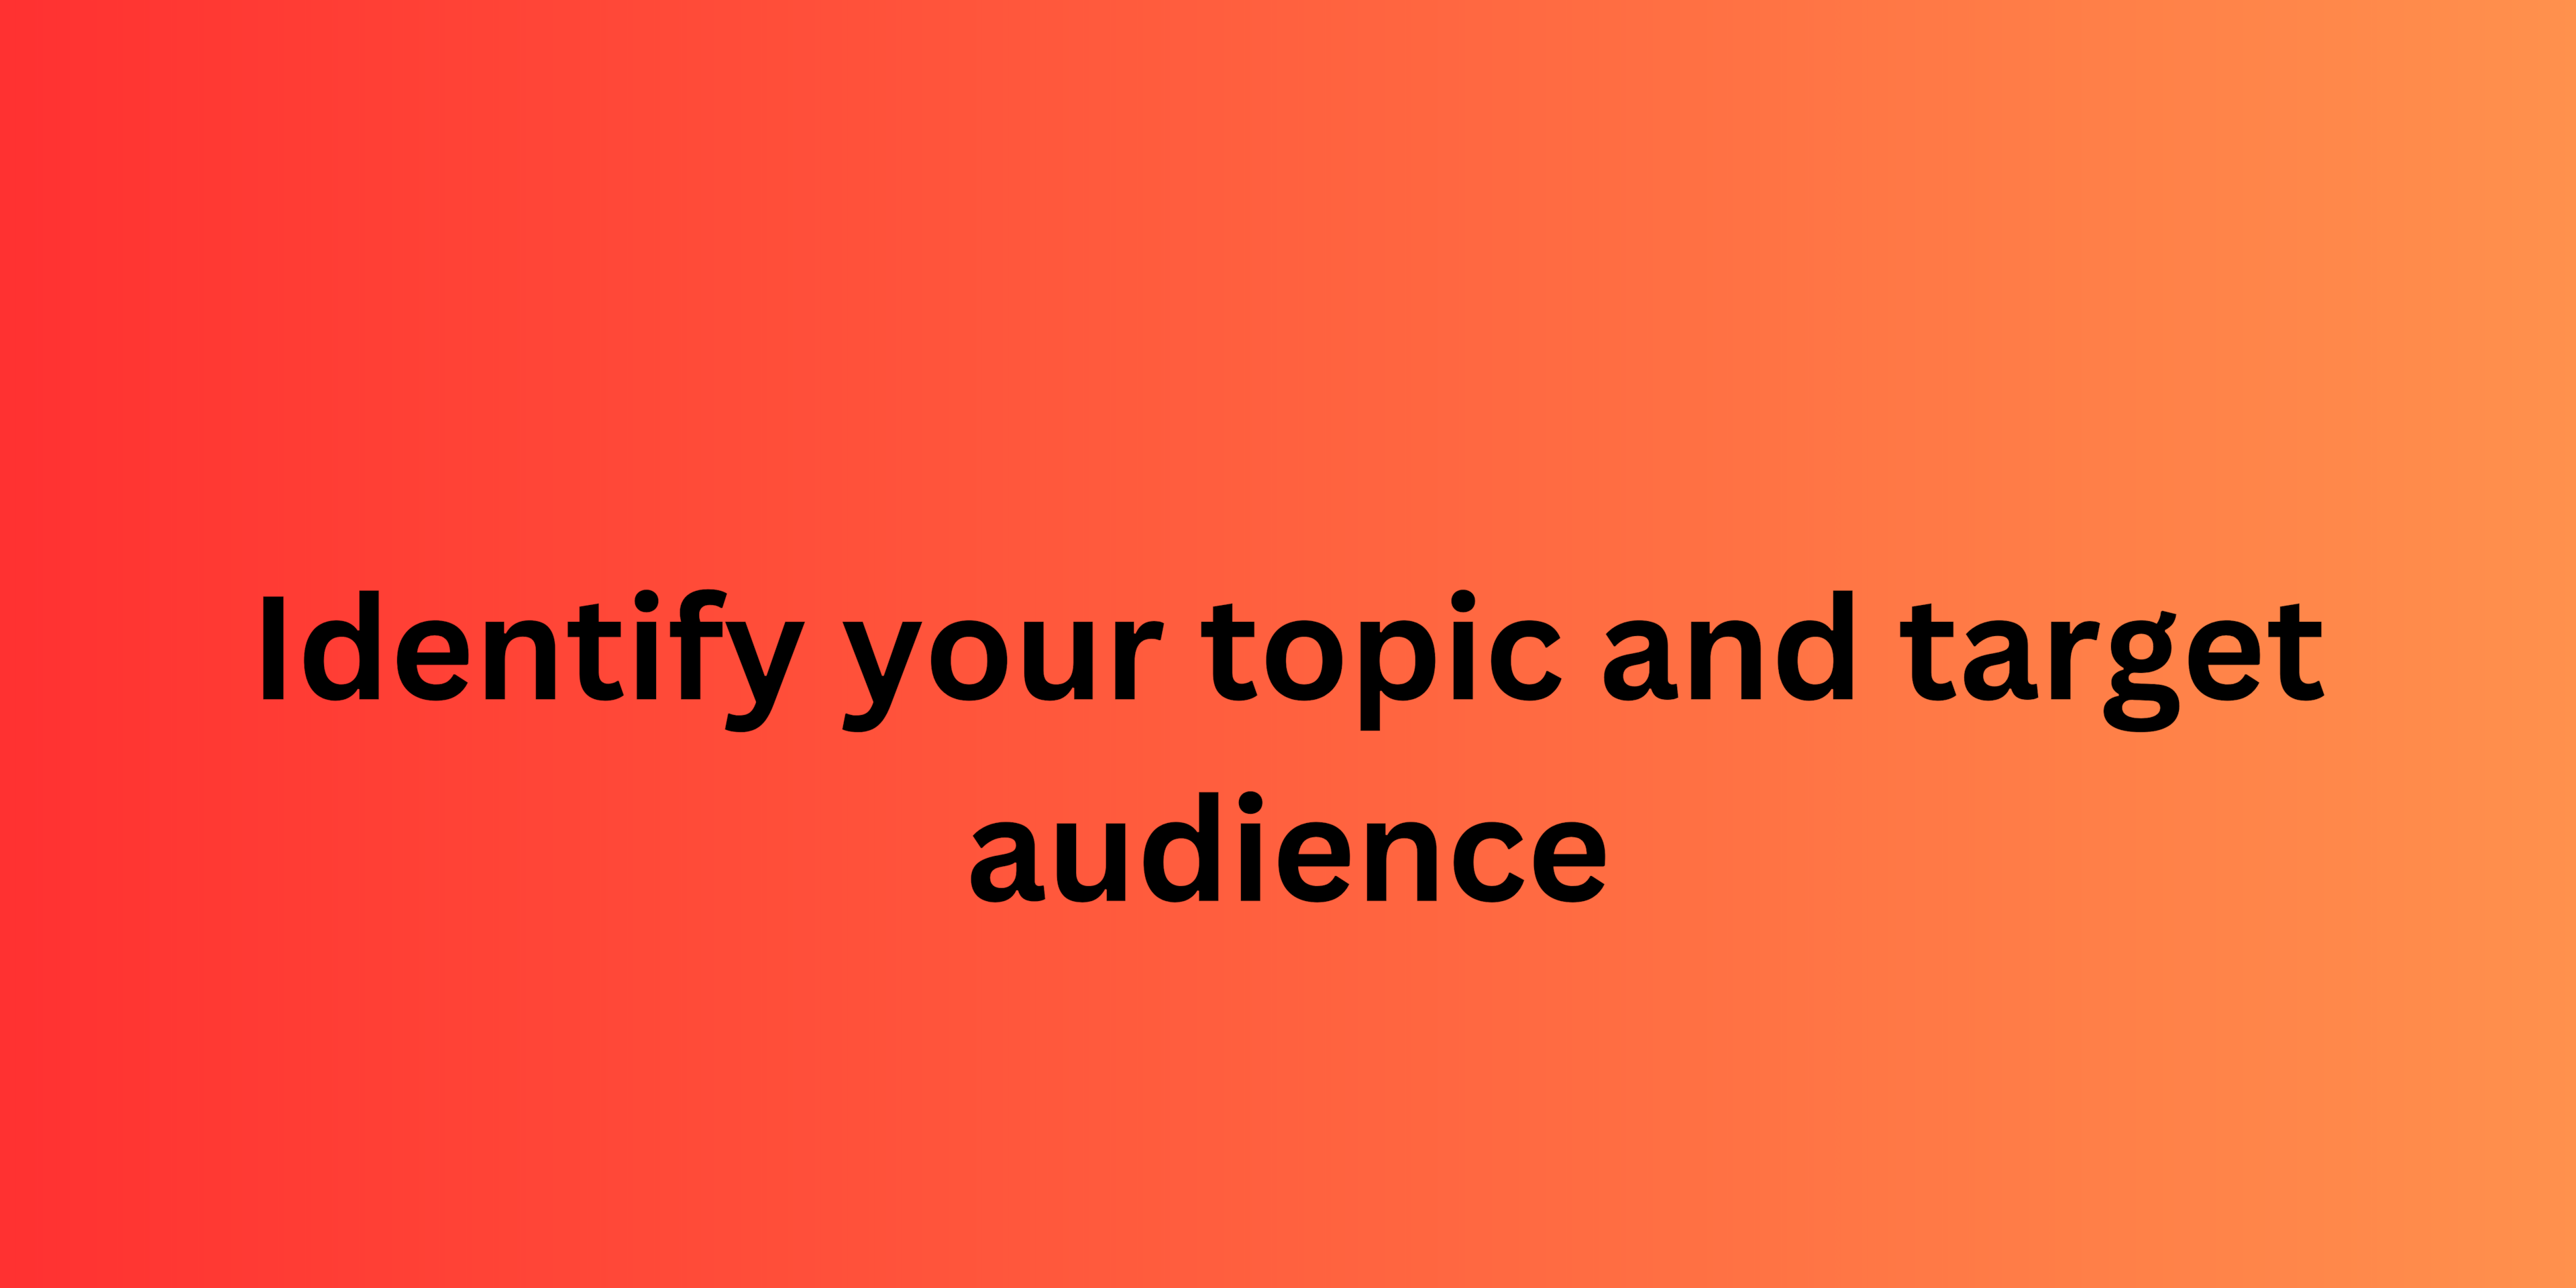 Identify your topic and target audience: